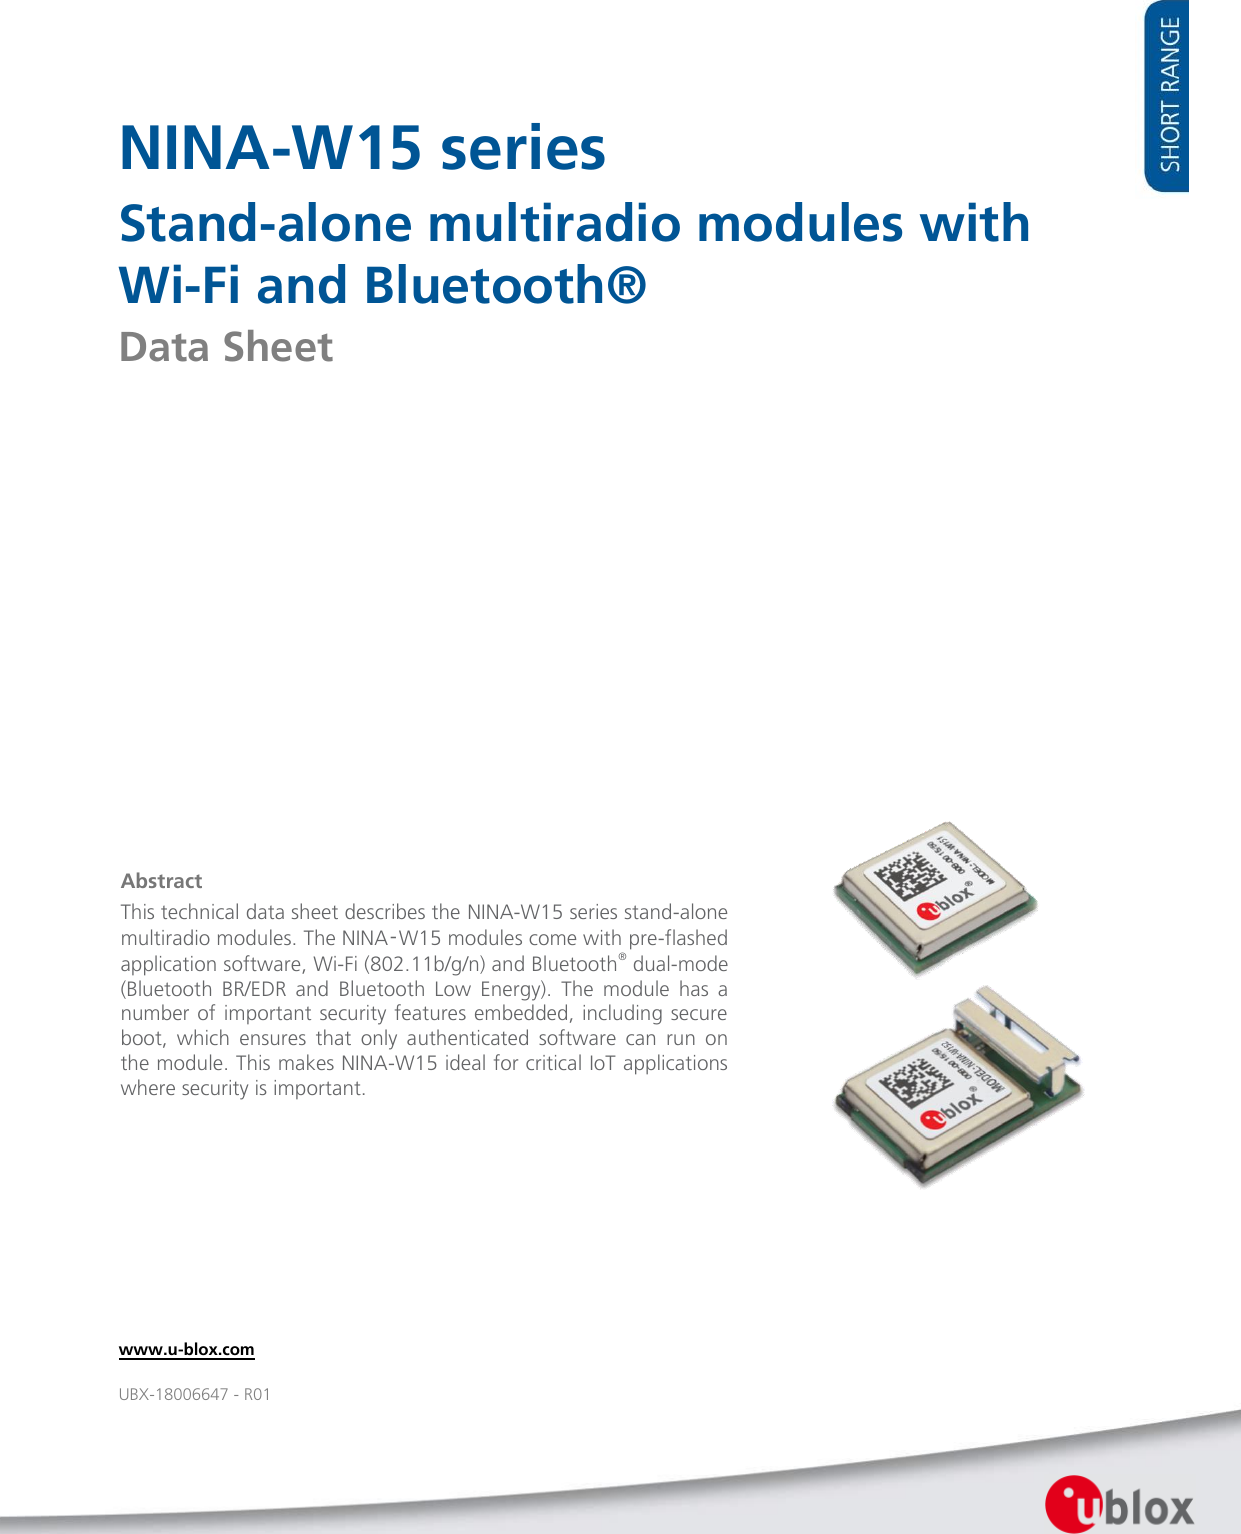        NINA-W15 series Stand-alone multiradio modules with Wi-Fi and Bluetooth® Data Sheet                      Abstract This technical data sheet describes the NINA-W15 series stand-alone multiradio modules. The NINA‑W15 modules come with pre-flashed application software, Wi-Fi (802.11b/g/n) and Bluetooth® dual-mode (Bluetooth  BR/EDR  and  Bluetooth  Low  Energy).  The  module  has  a number of important security features embedded, including secure boot,  which  ensures  that  only  authenticated  software  can  run  on the module. This makes NINA-W15 ideal for critical IoT applications where security is important.   www.u-blox.com UBX-18006647 - R01 